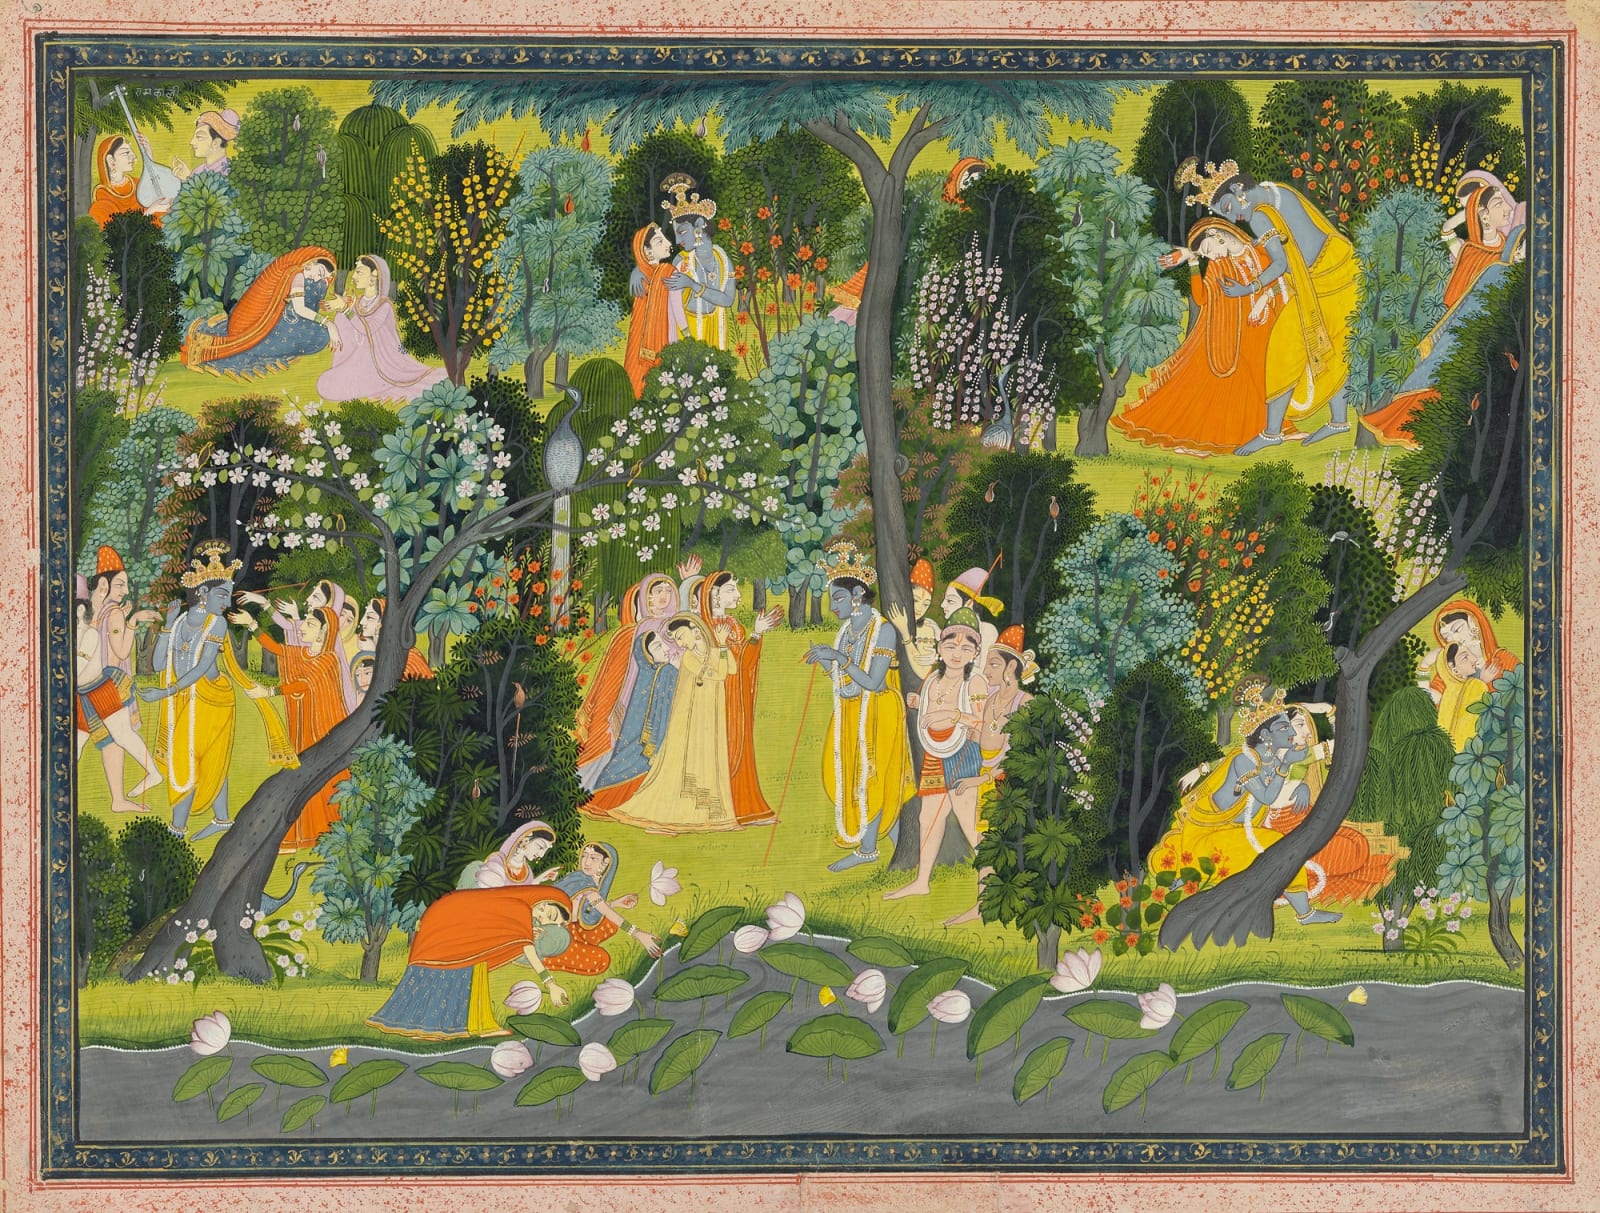 Krishna makes love to the Wives of the Cowherds of Brindaban, Page from the ‘Lambagraon’ Gitagovinda, Attributed to the artist Purkhu and workshop, Kangra, c. 1820